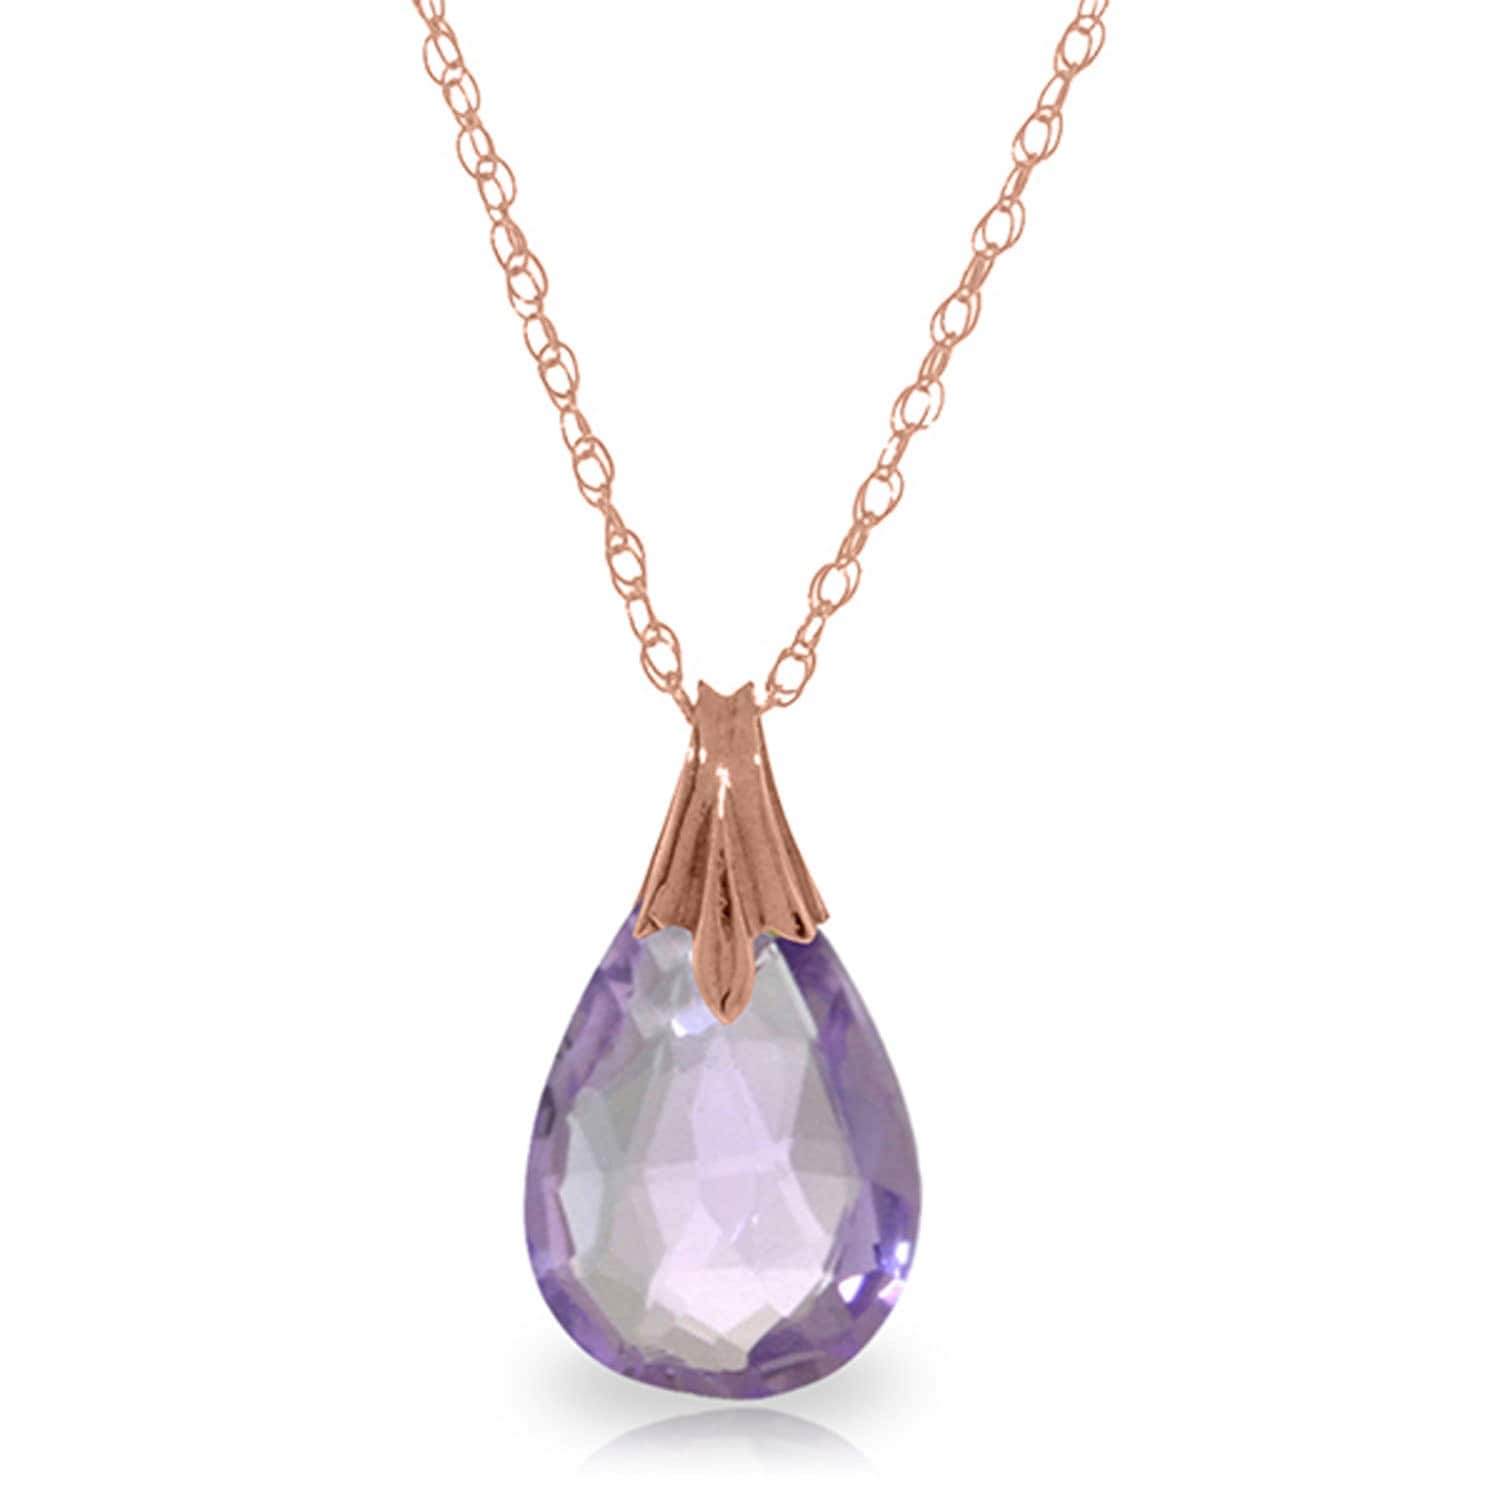 Genuine Amethyst Pear Cut 5 ct Gem Solitaire Pendant Necklace in 14K Solid Gold